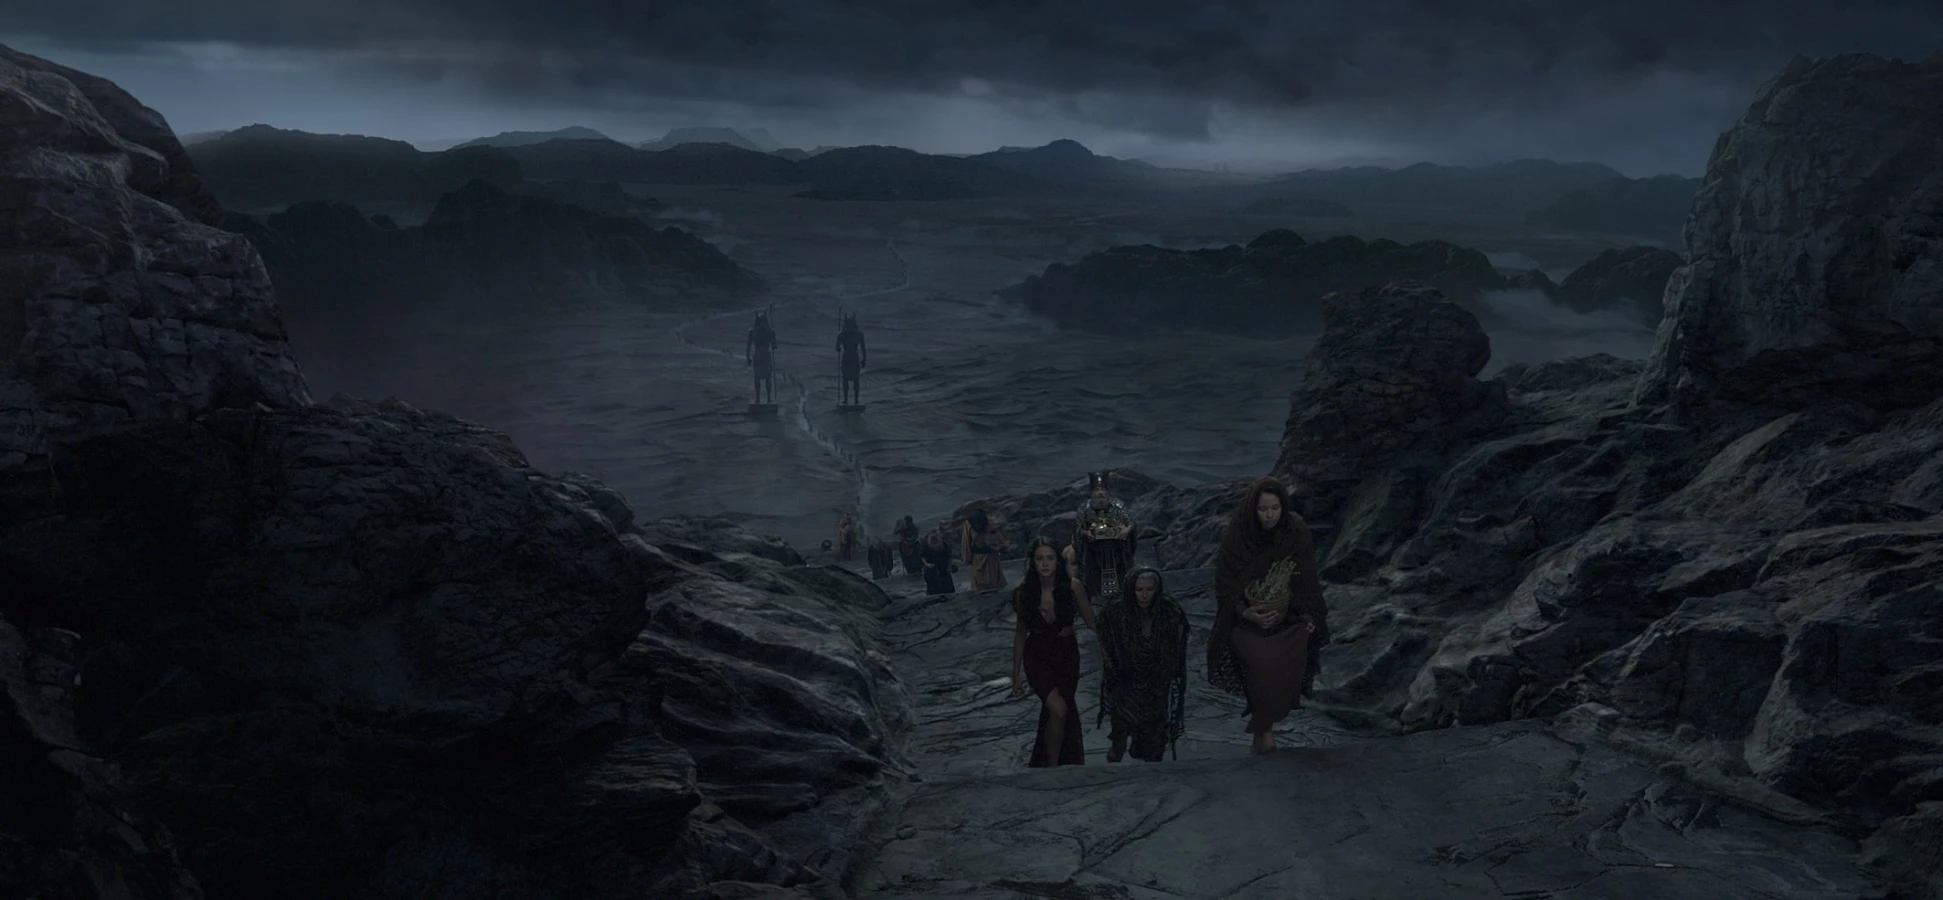  Gods of Egypt, people walking in dark valley from Raynault vfx 